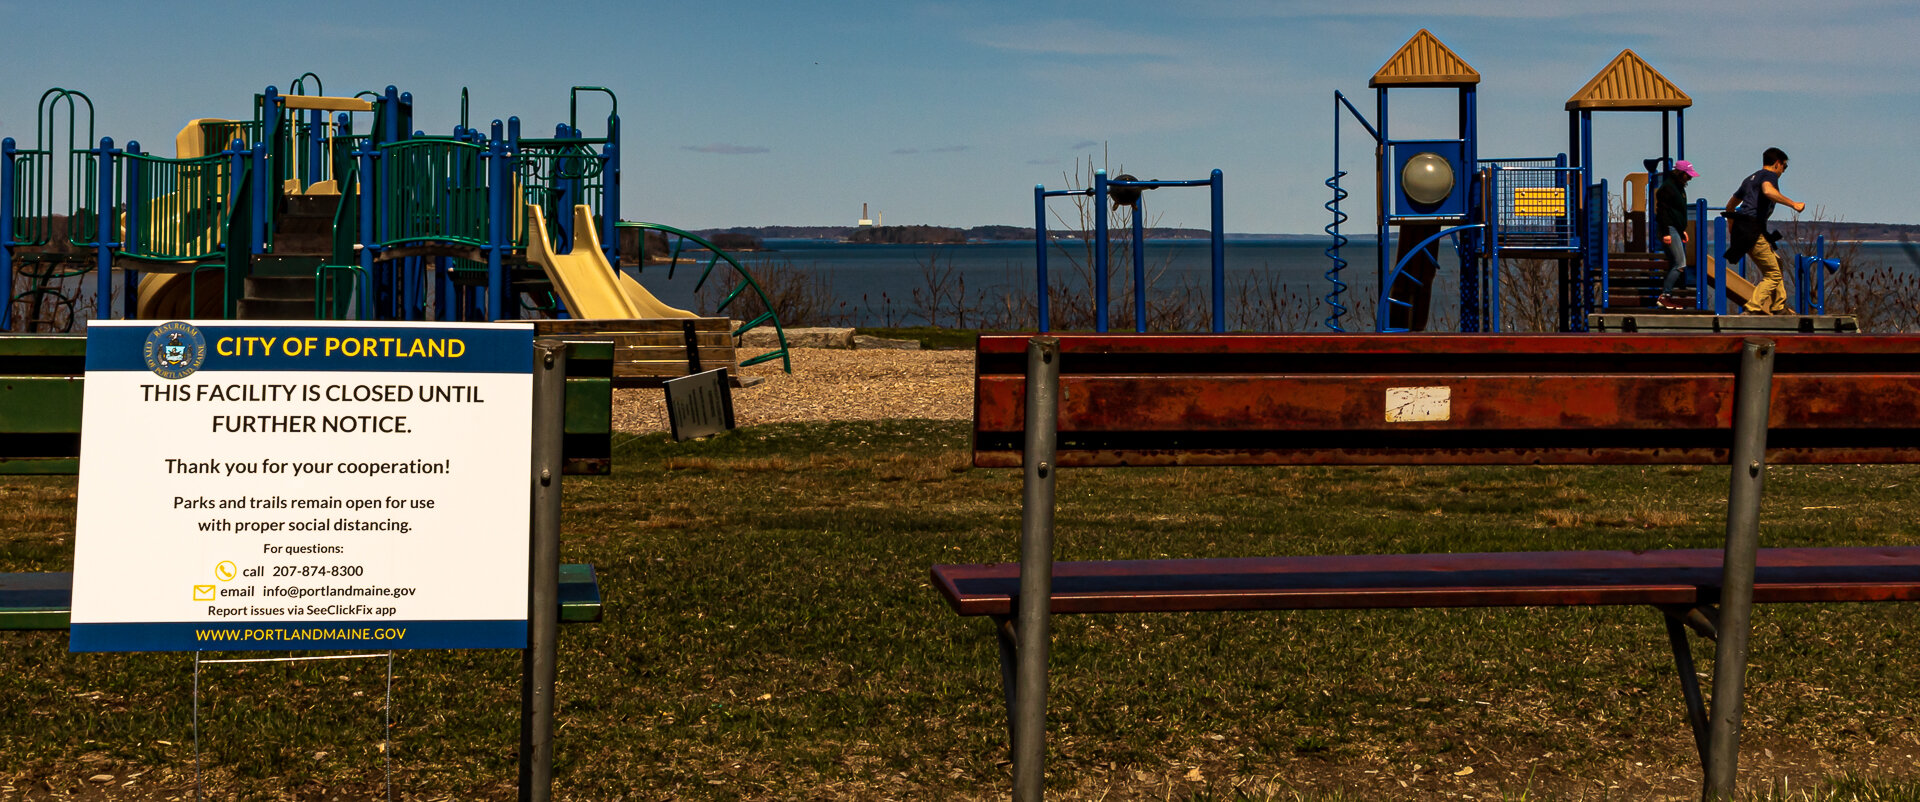 Obeying the Rules at the Playground, Eastern Promenade, Portland Maine--April 2020.jpg